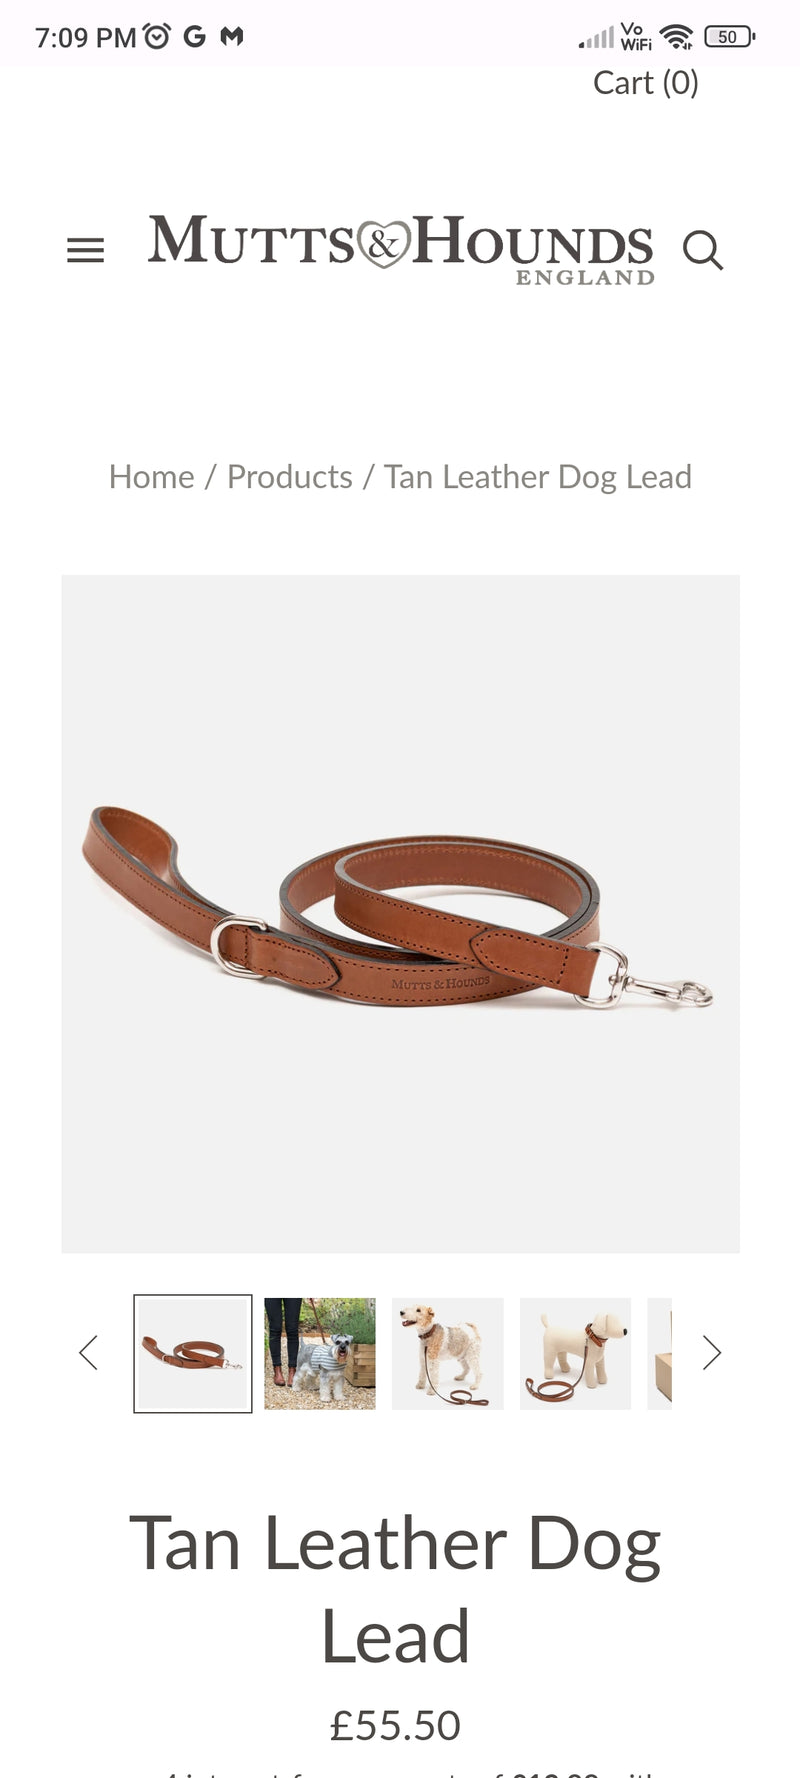 Tan Leather Dog Lead

- Mutts & Hounds